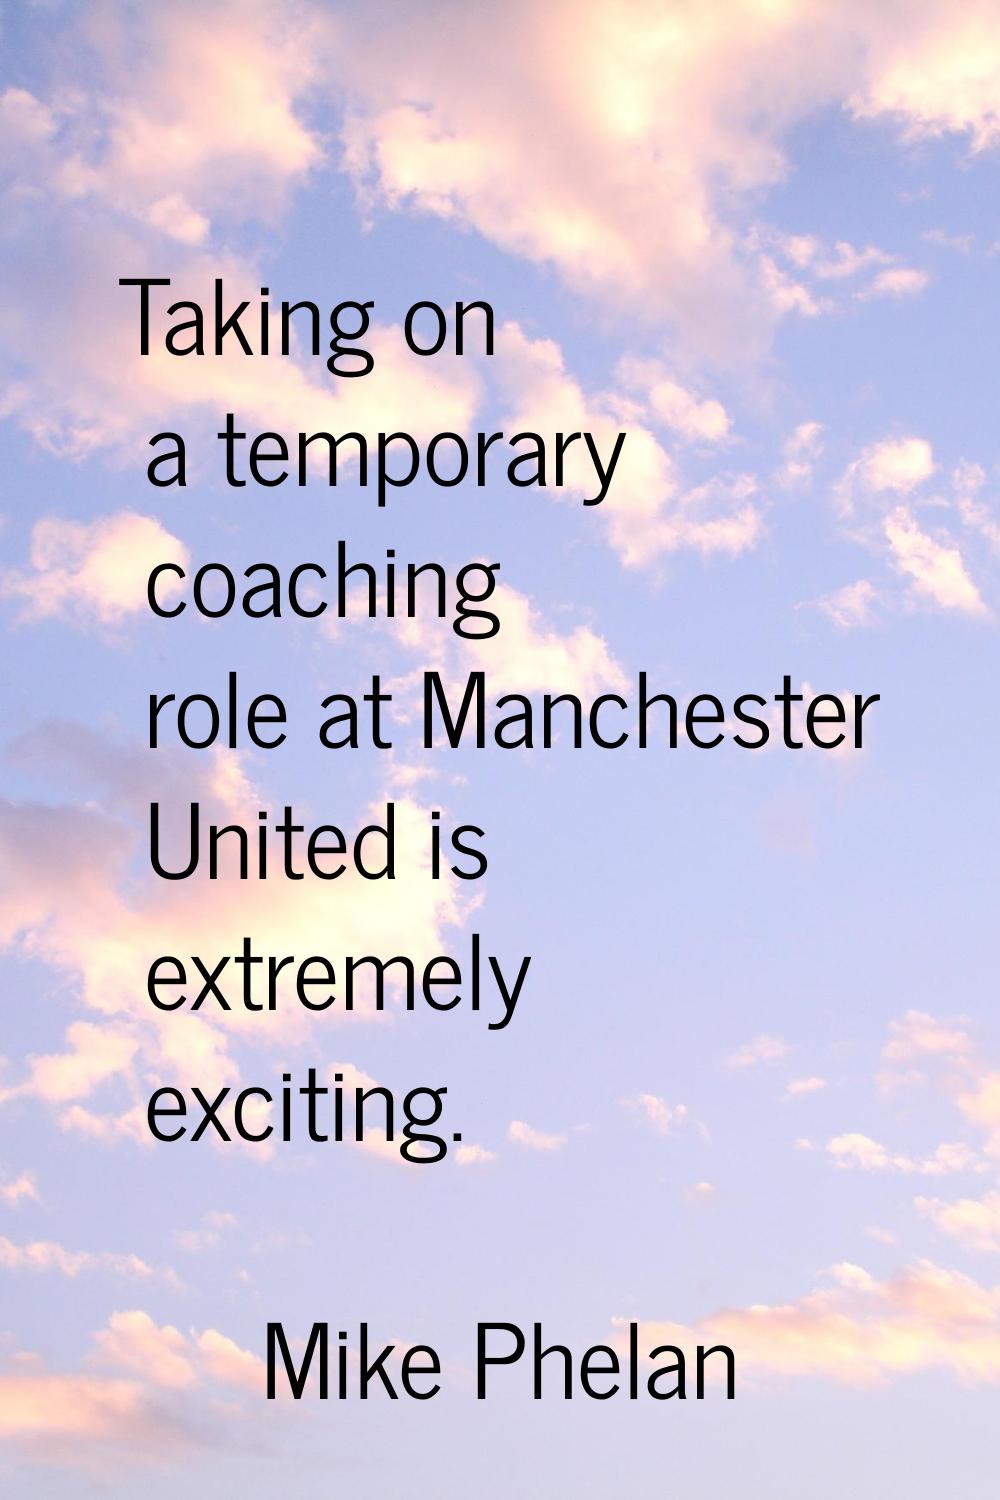 Taking on a temporary coaching role at Manchester United is extremely exciting.